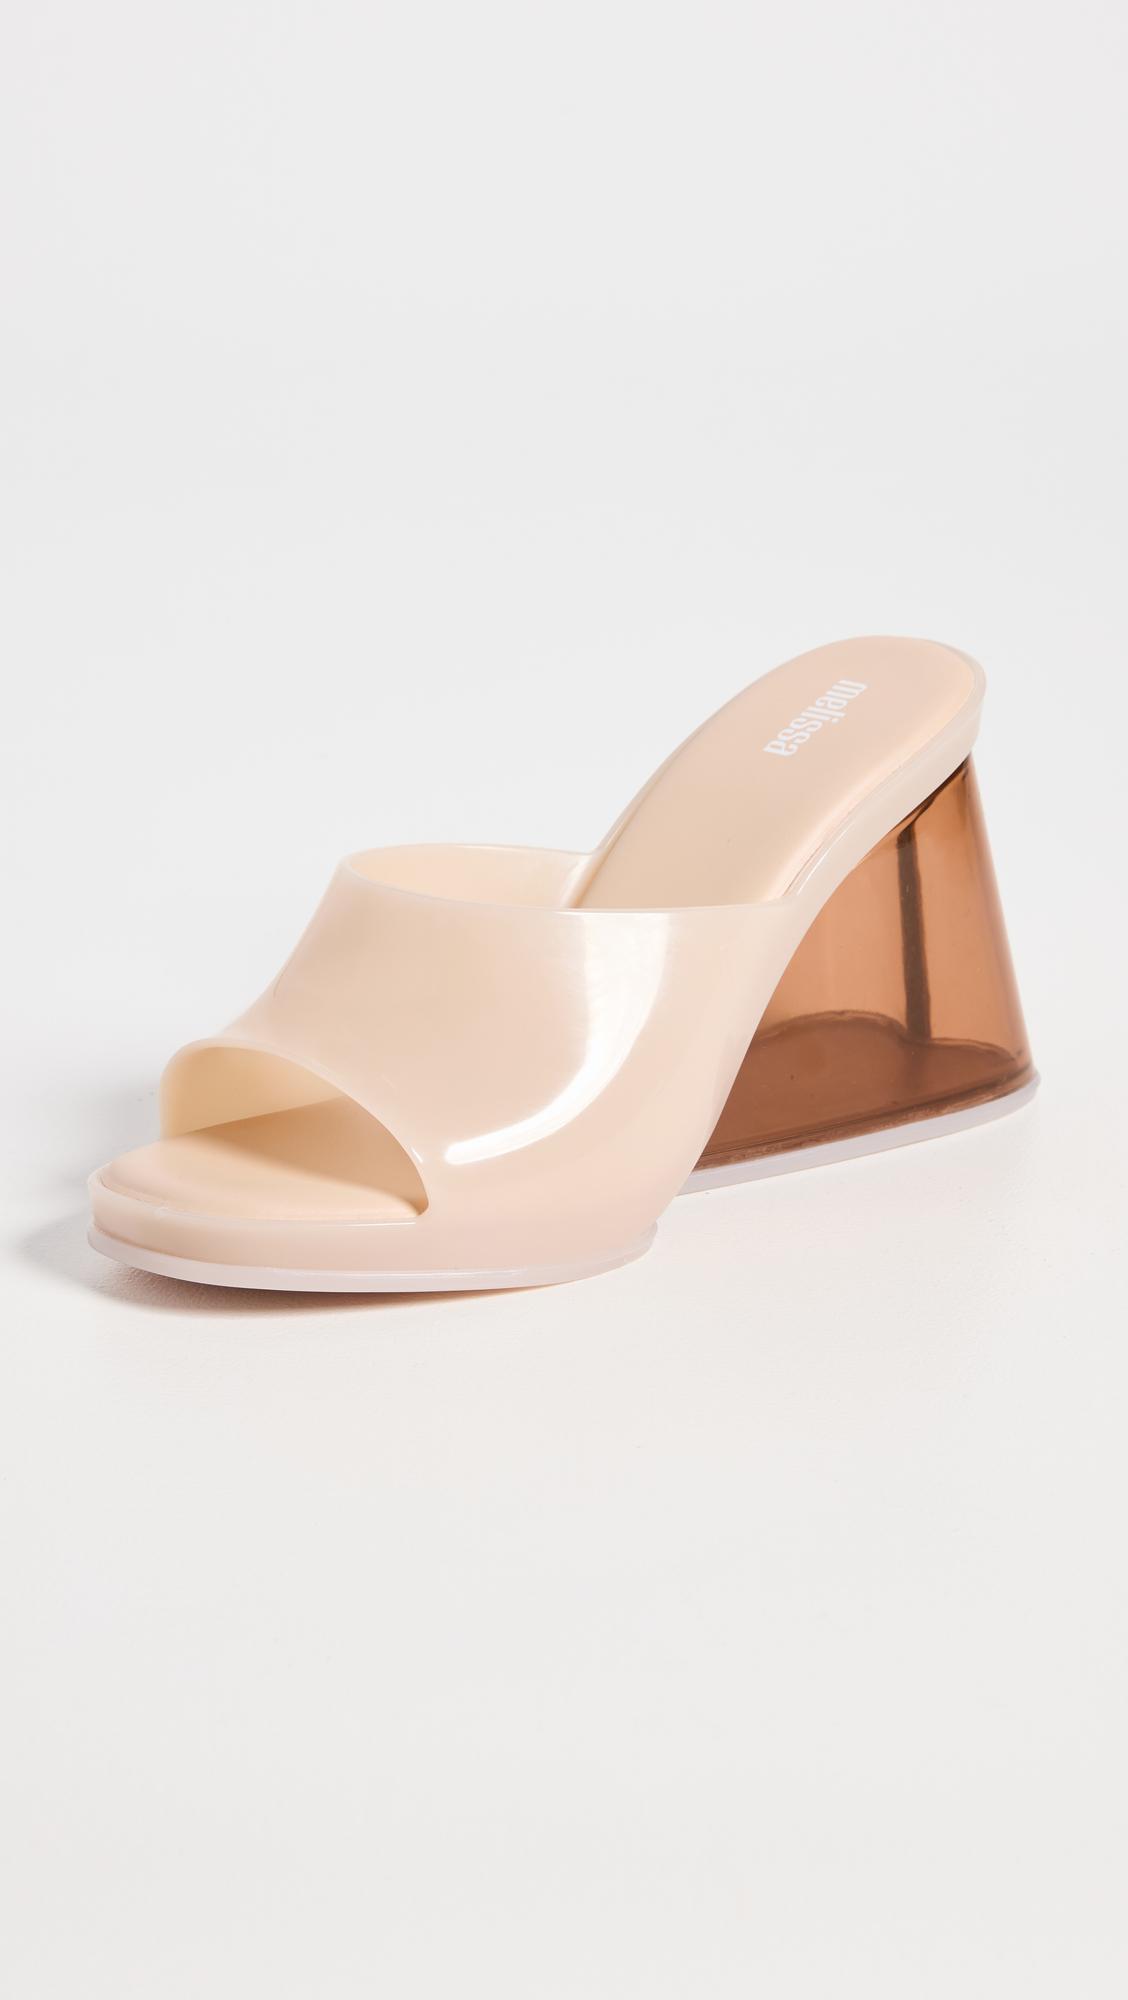 Melissa Darling Wedge Sandals in Natural | Lyst